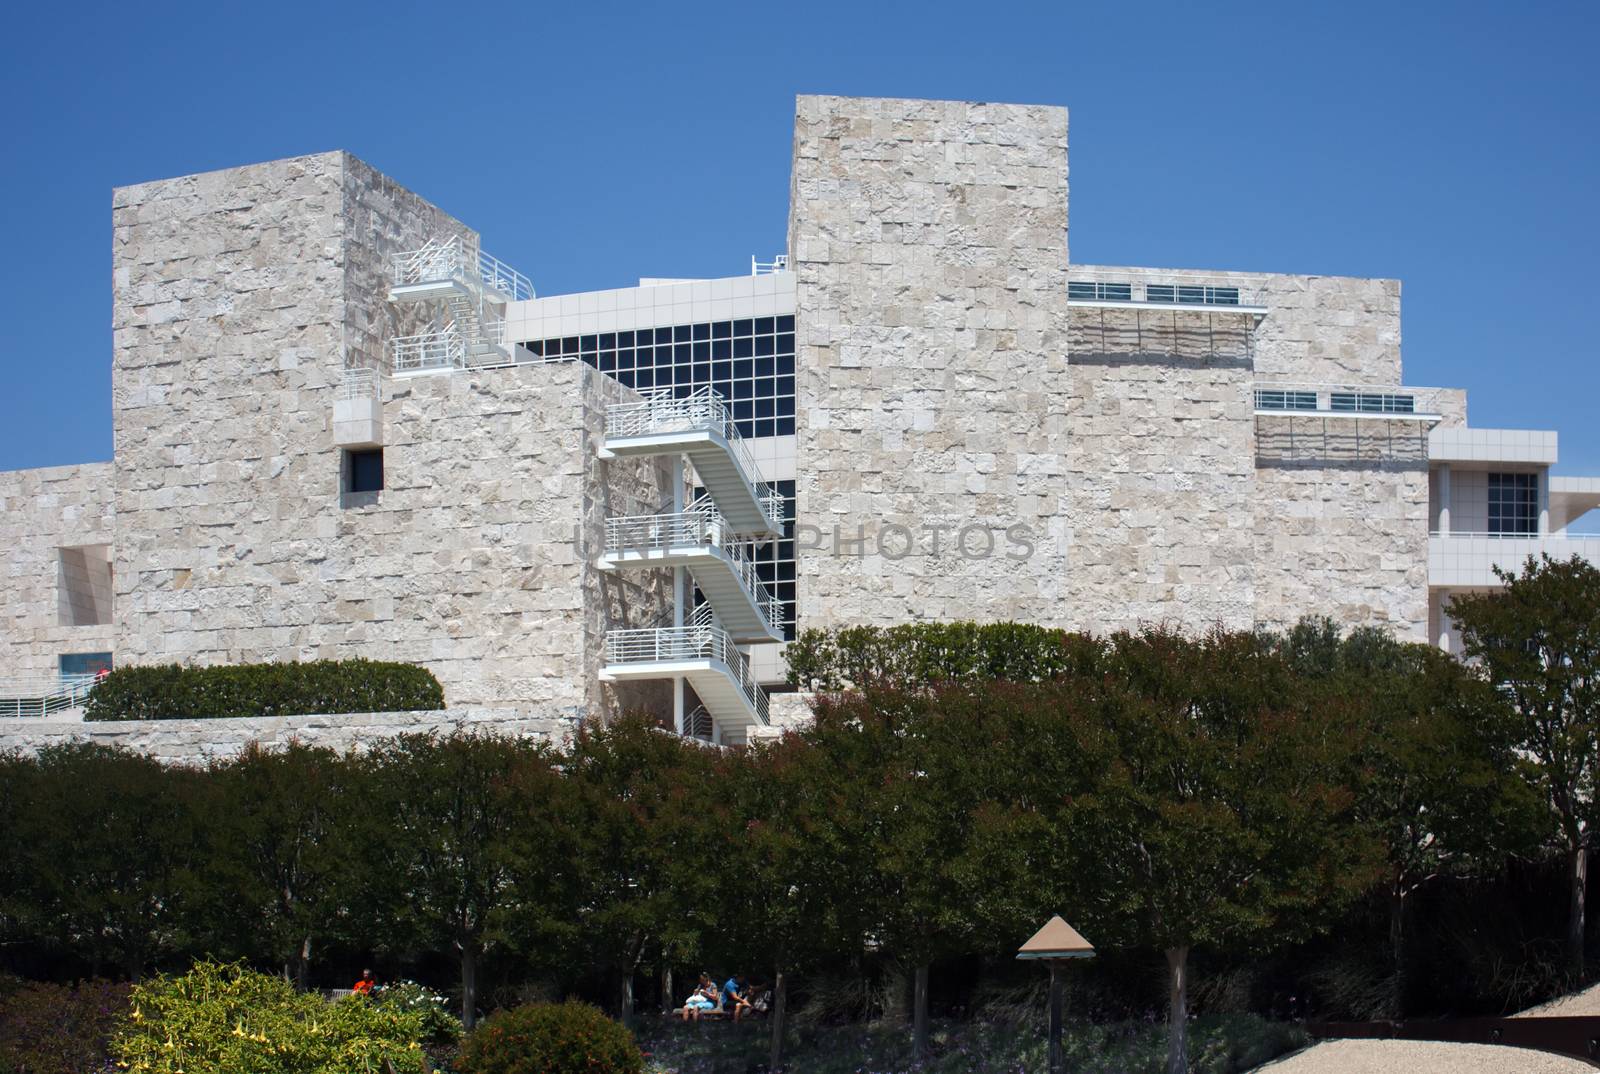 LOS ANGELES, USA - JUNE 4, 2009: The Getty Center museum in Los Angeles California USA was designed by architect Richard Meier in 1997